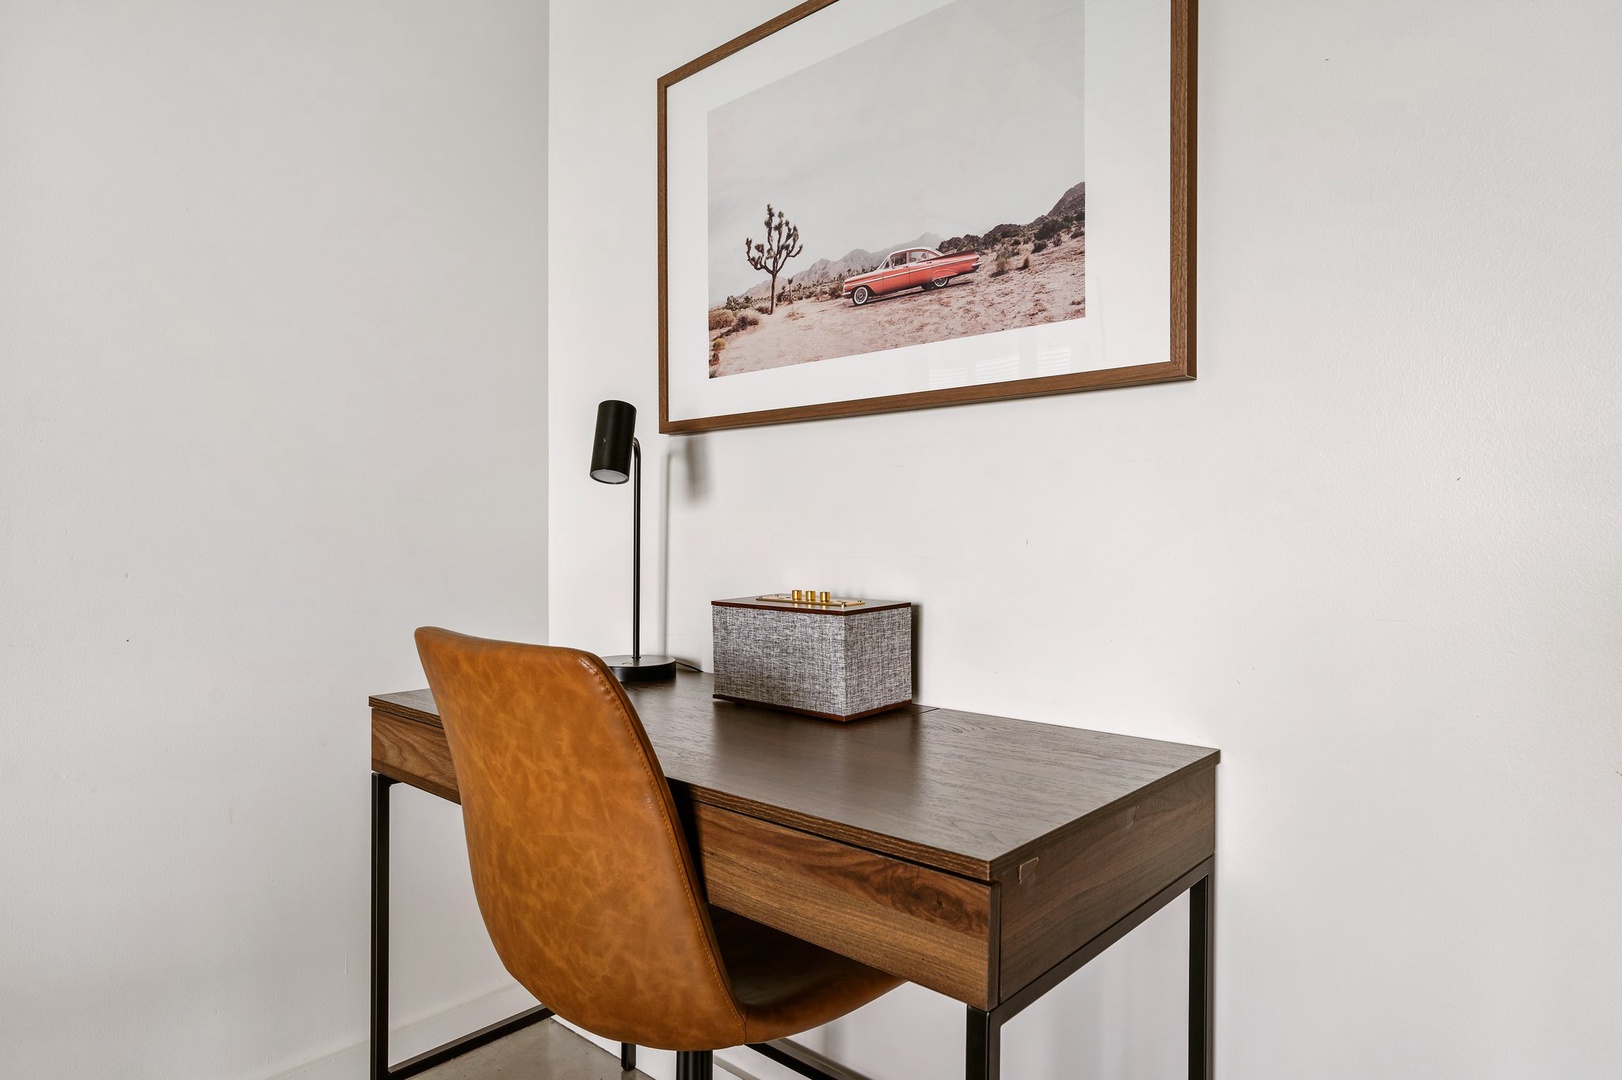 Work comfortably in the dedicated desk area with natural light.